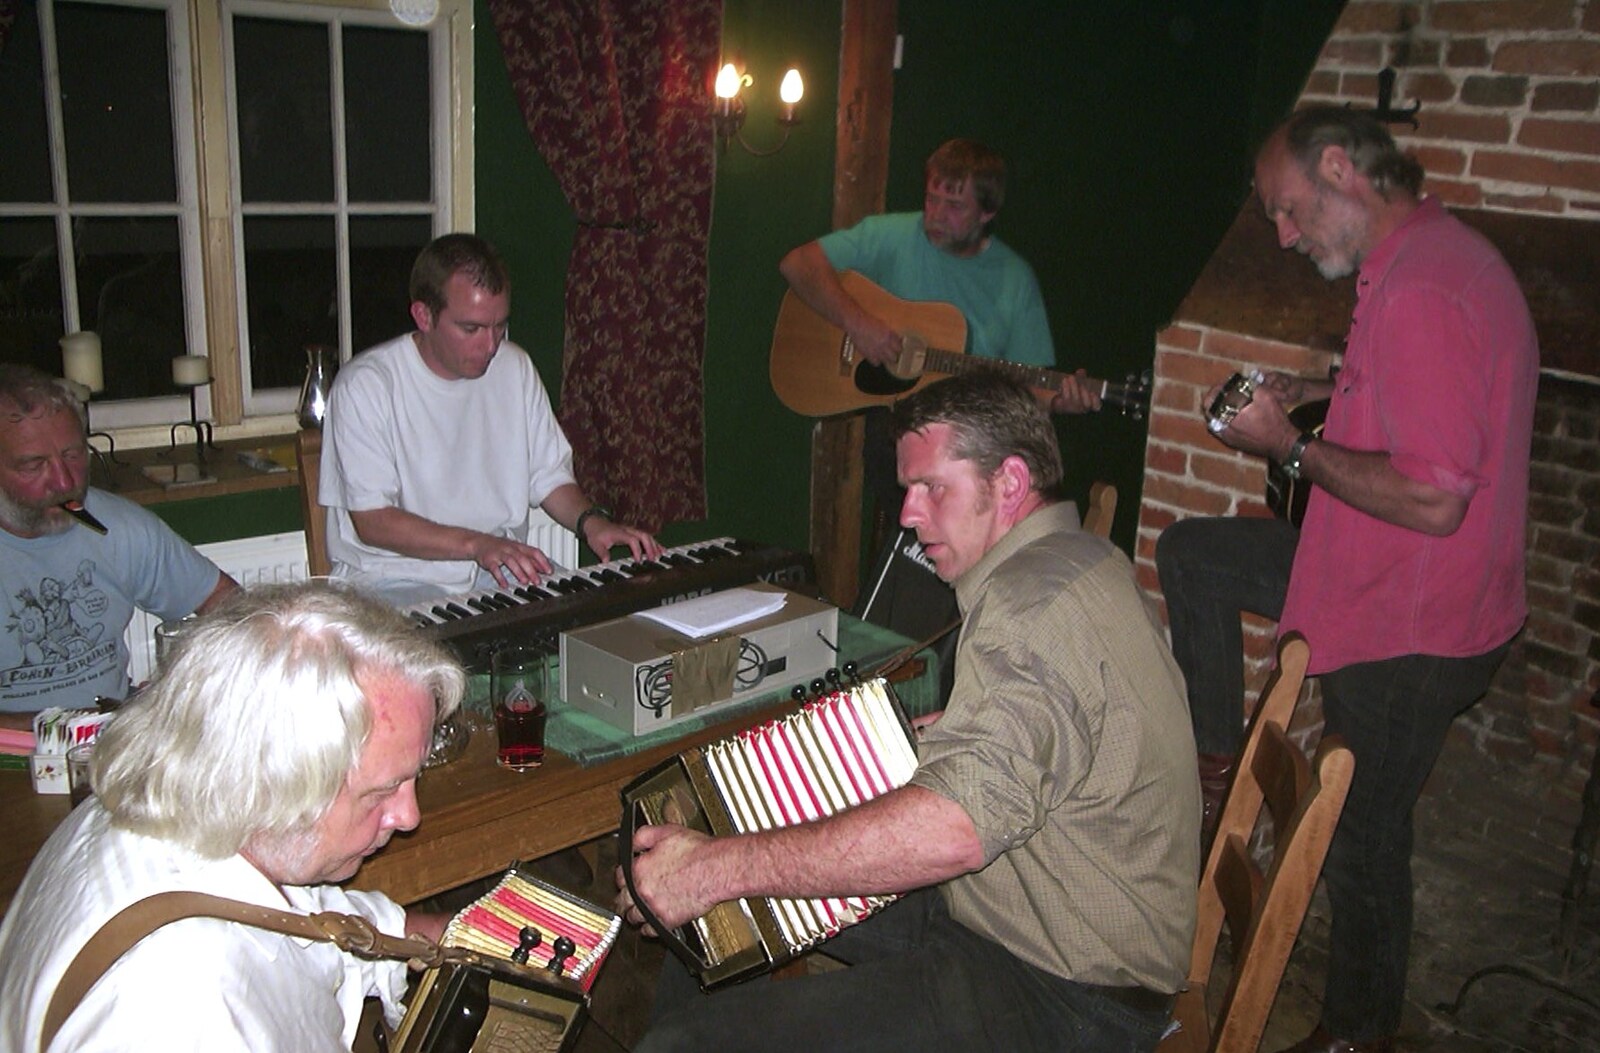 Big Steve gives it some on accordion from The BSCC at Laxfield and Hoxne, Suffolk - 2nd May 2002